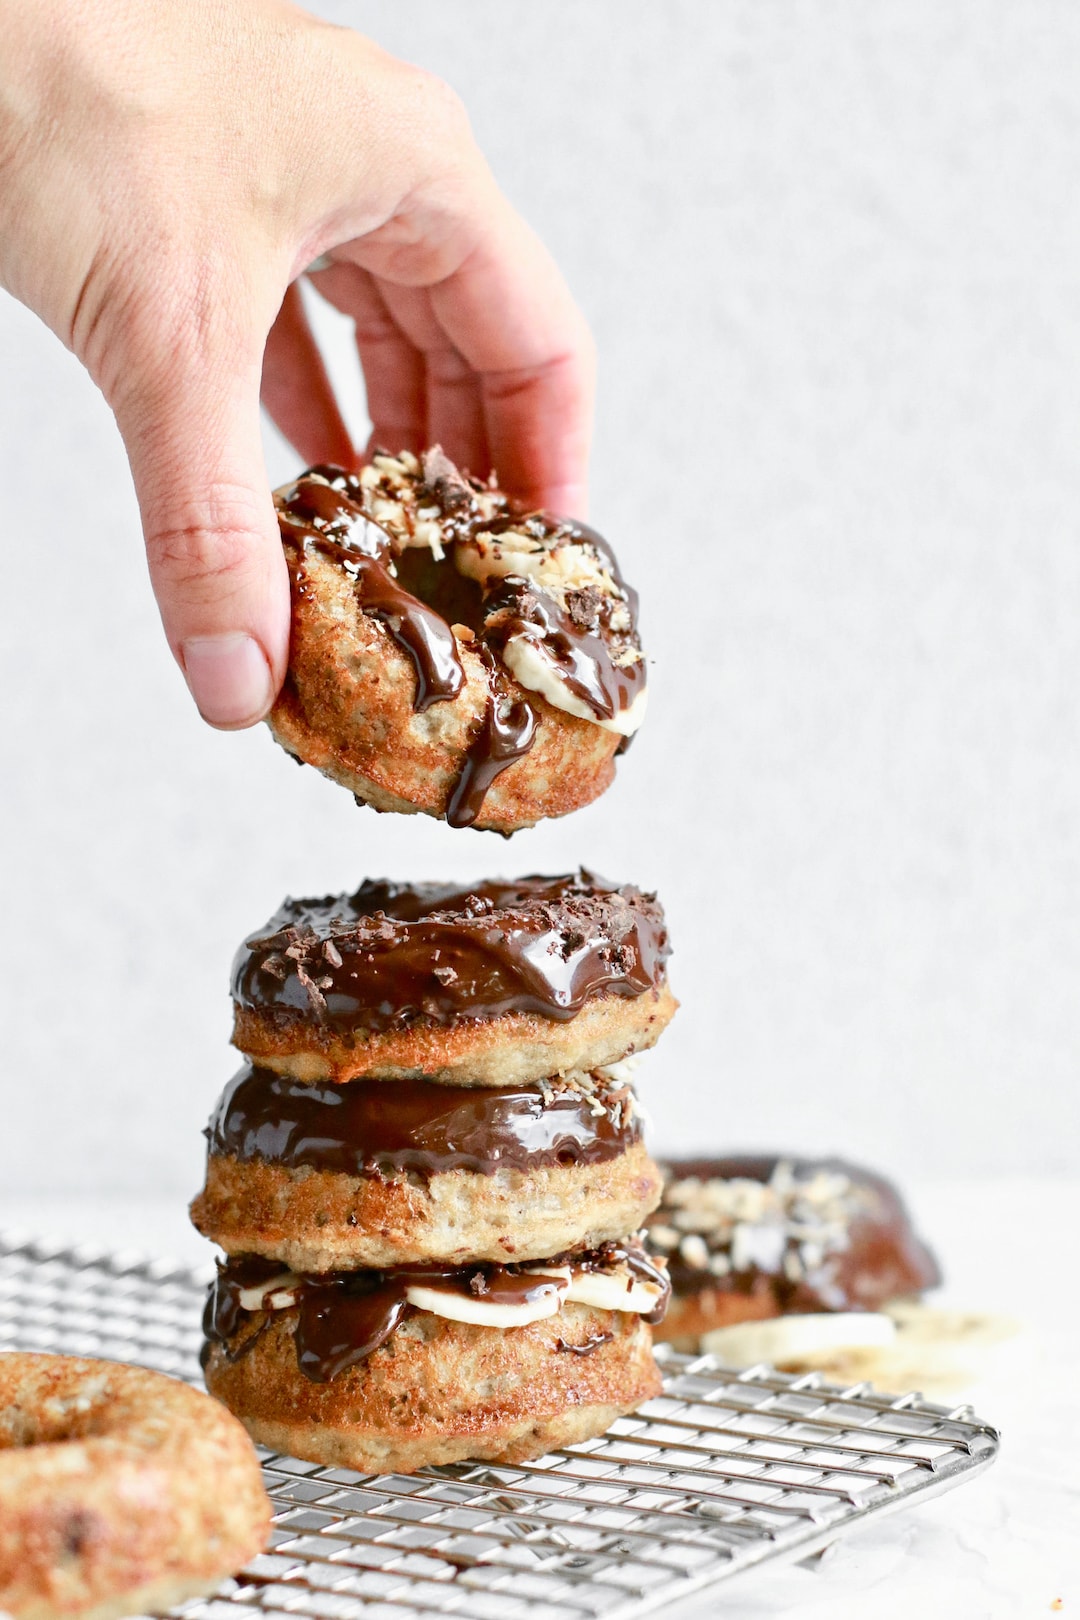 Stacked healthy banana bread donuts with chocolate glaze - plant based